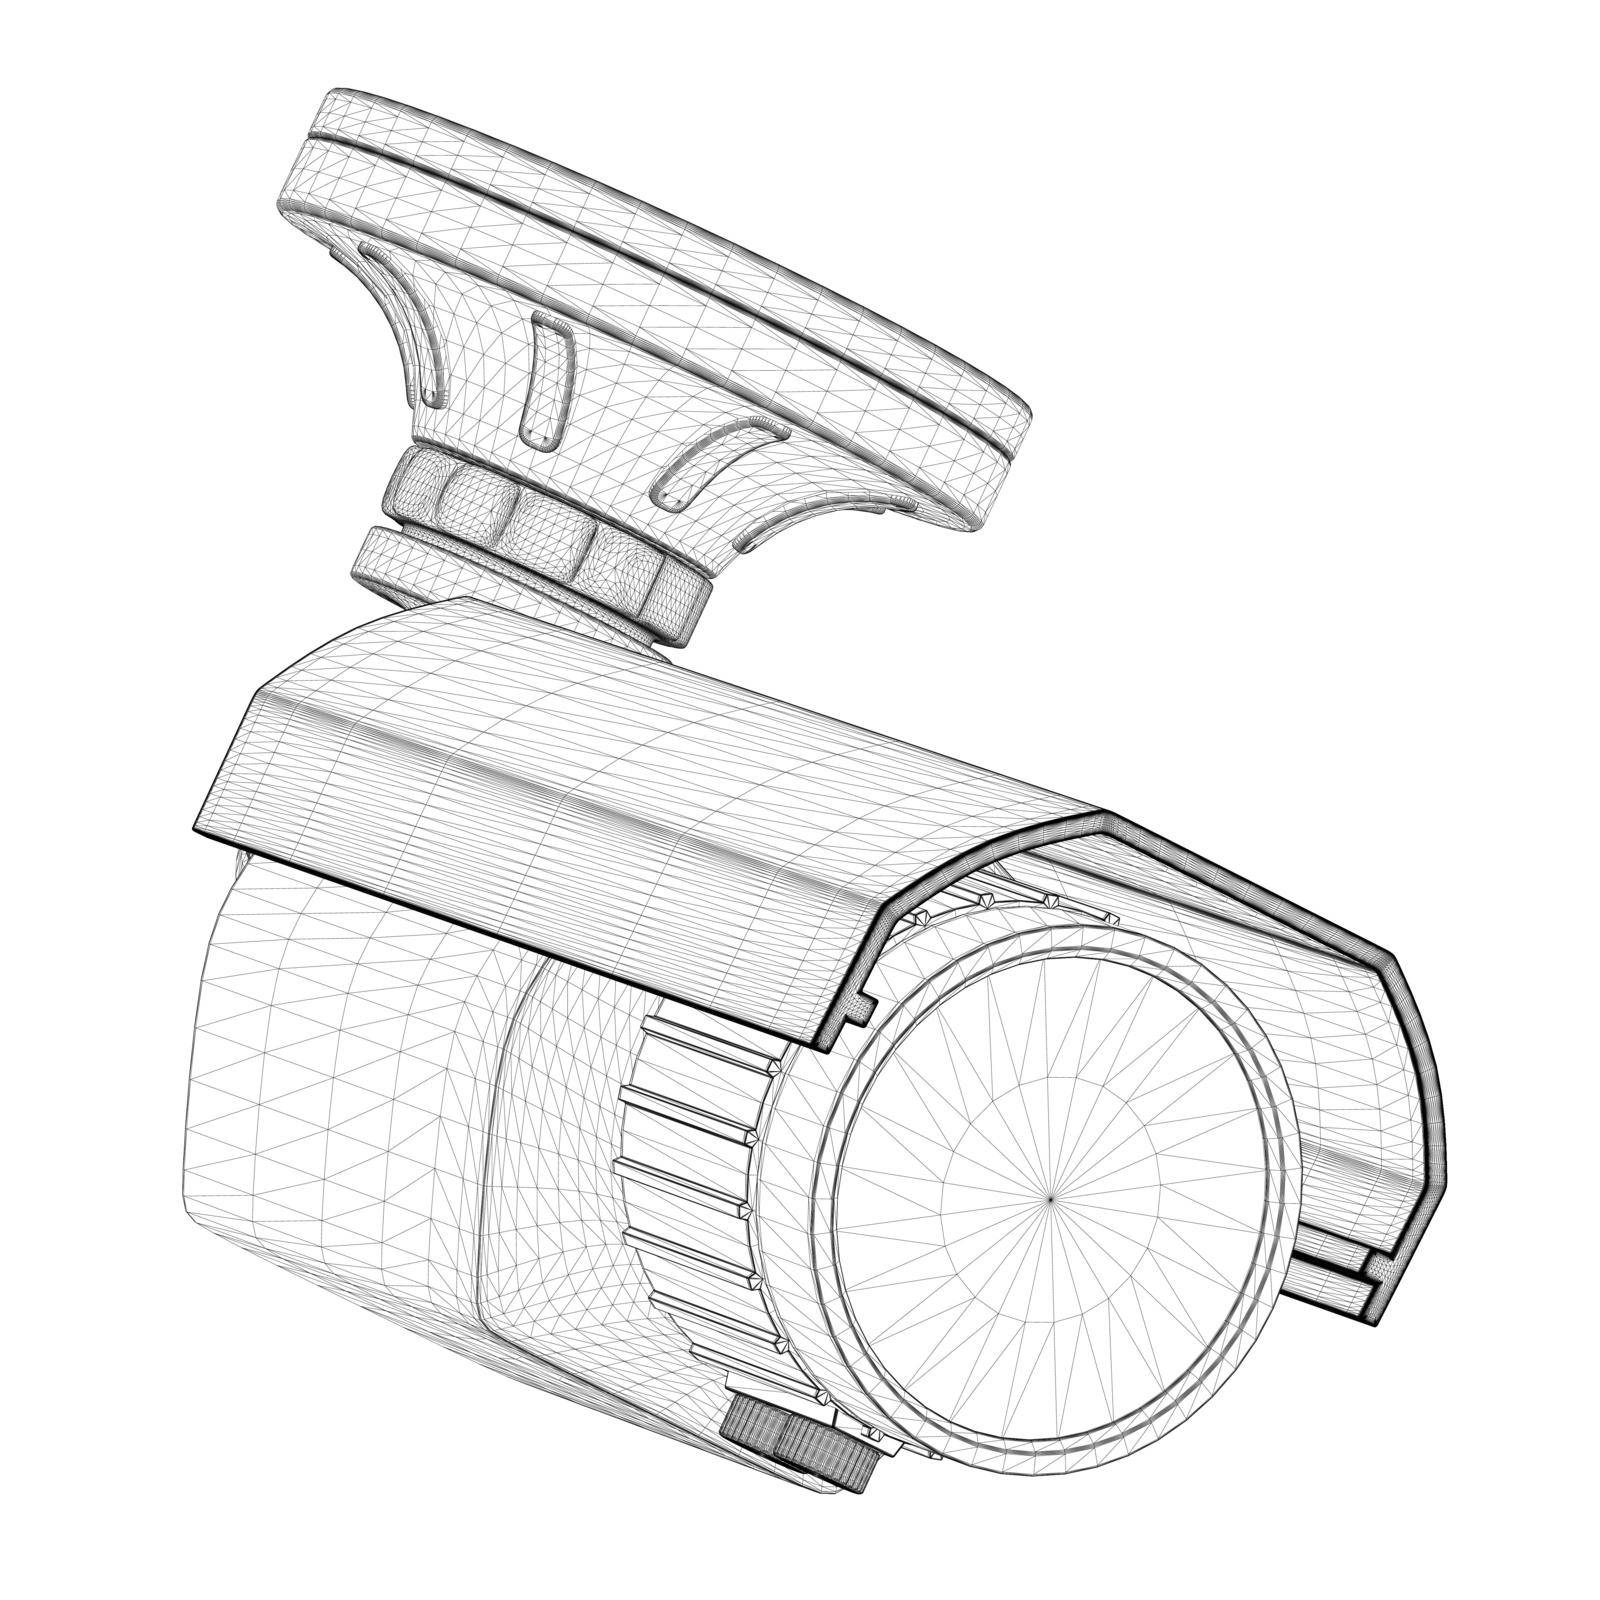 Wireframe cctv camera from black lines isolated on white background. Front view. 3D. Vector illustration by Slim3D